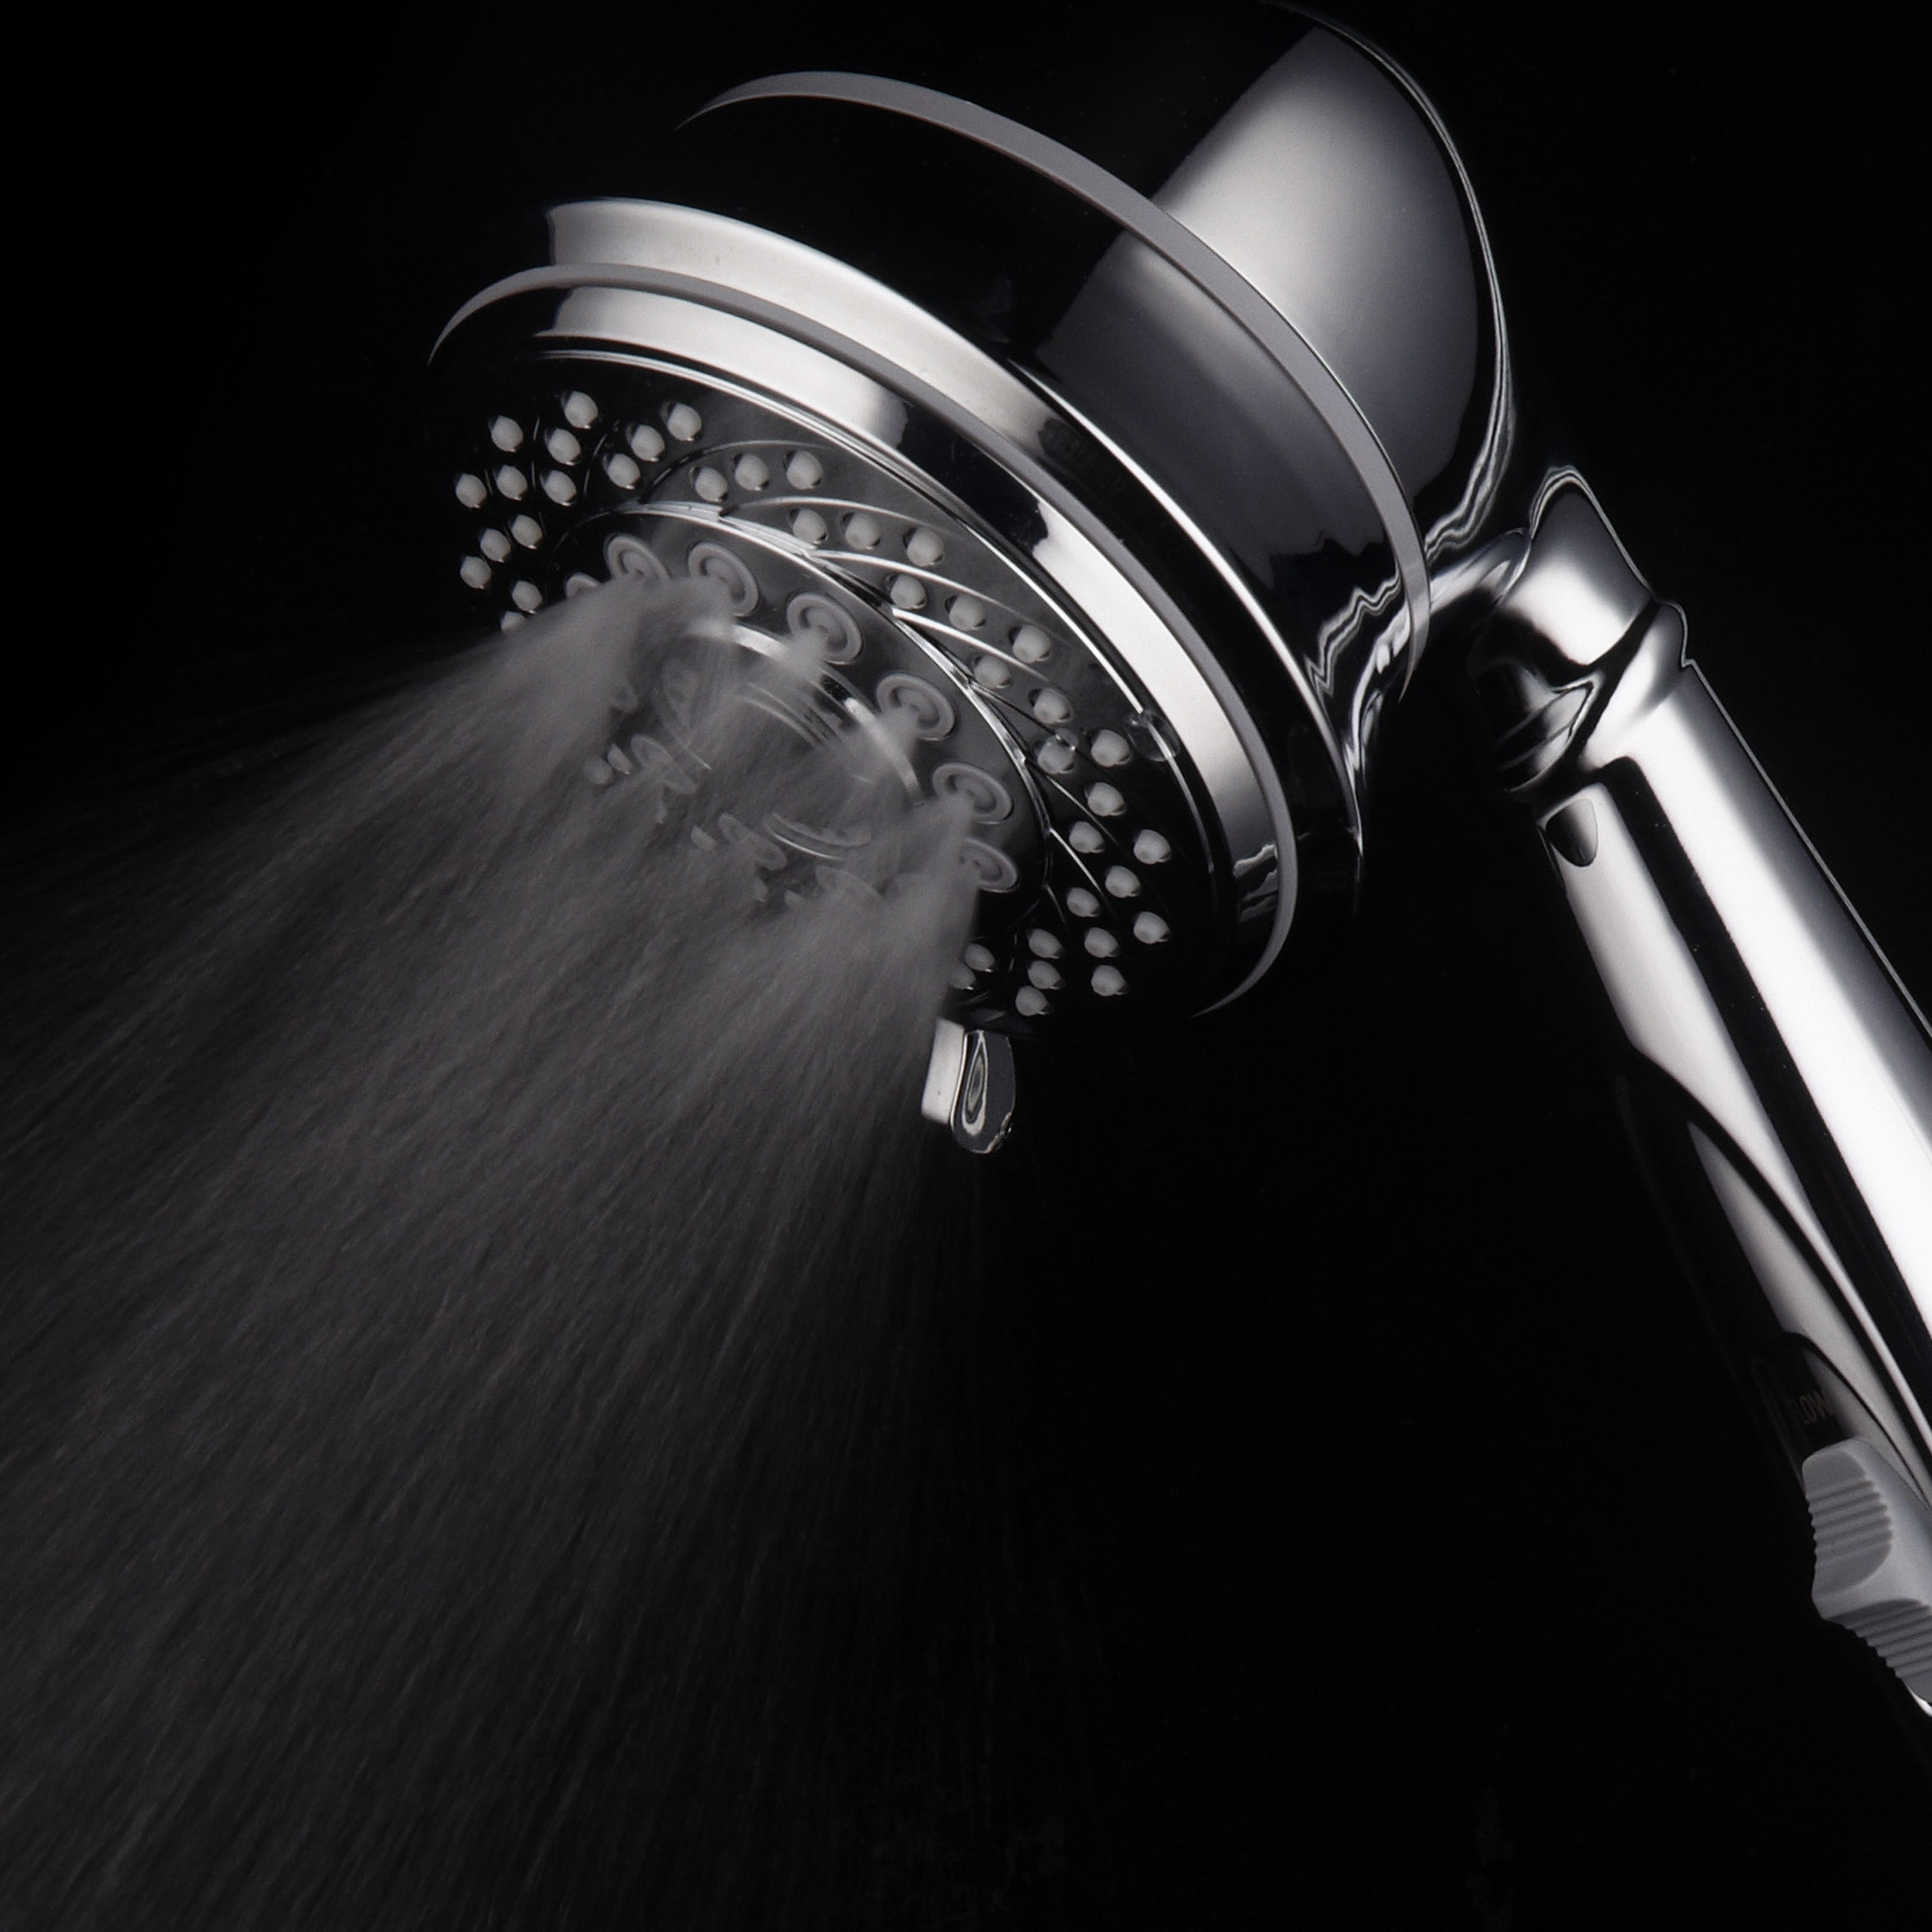 HotelSpa AquaCare 7-Setting, 3-Stage Filtered Handheld Shower Head, Chrome - image 3 of 8